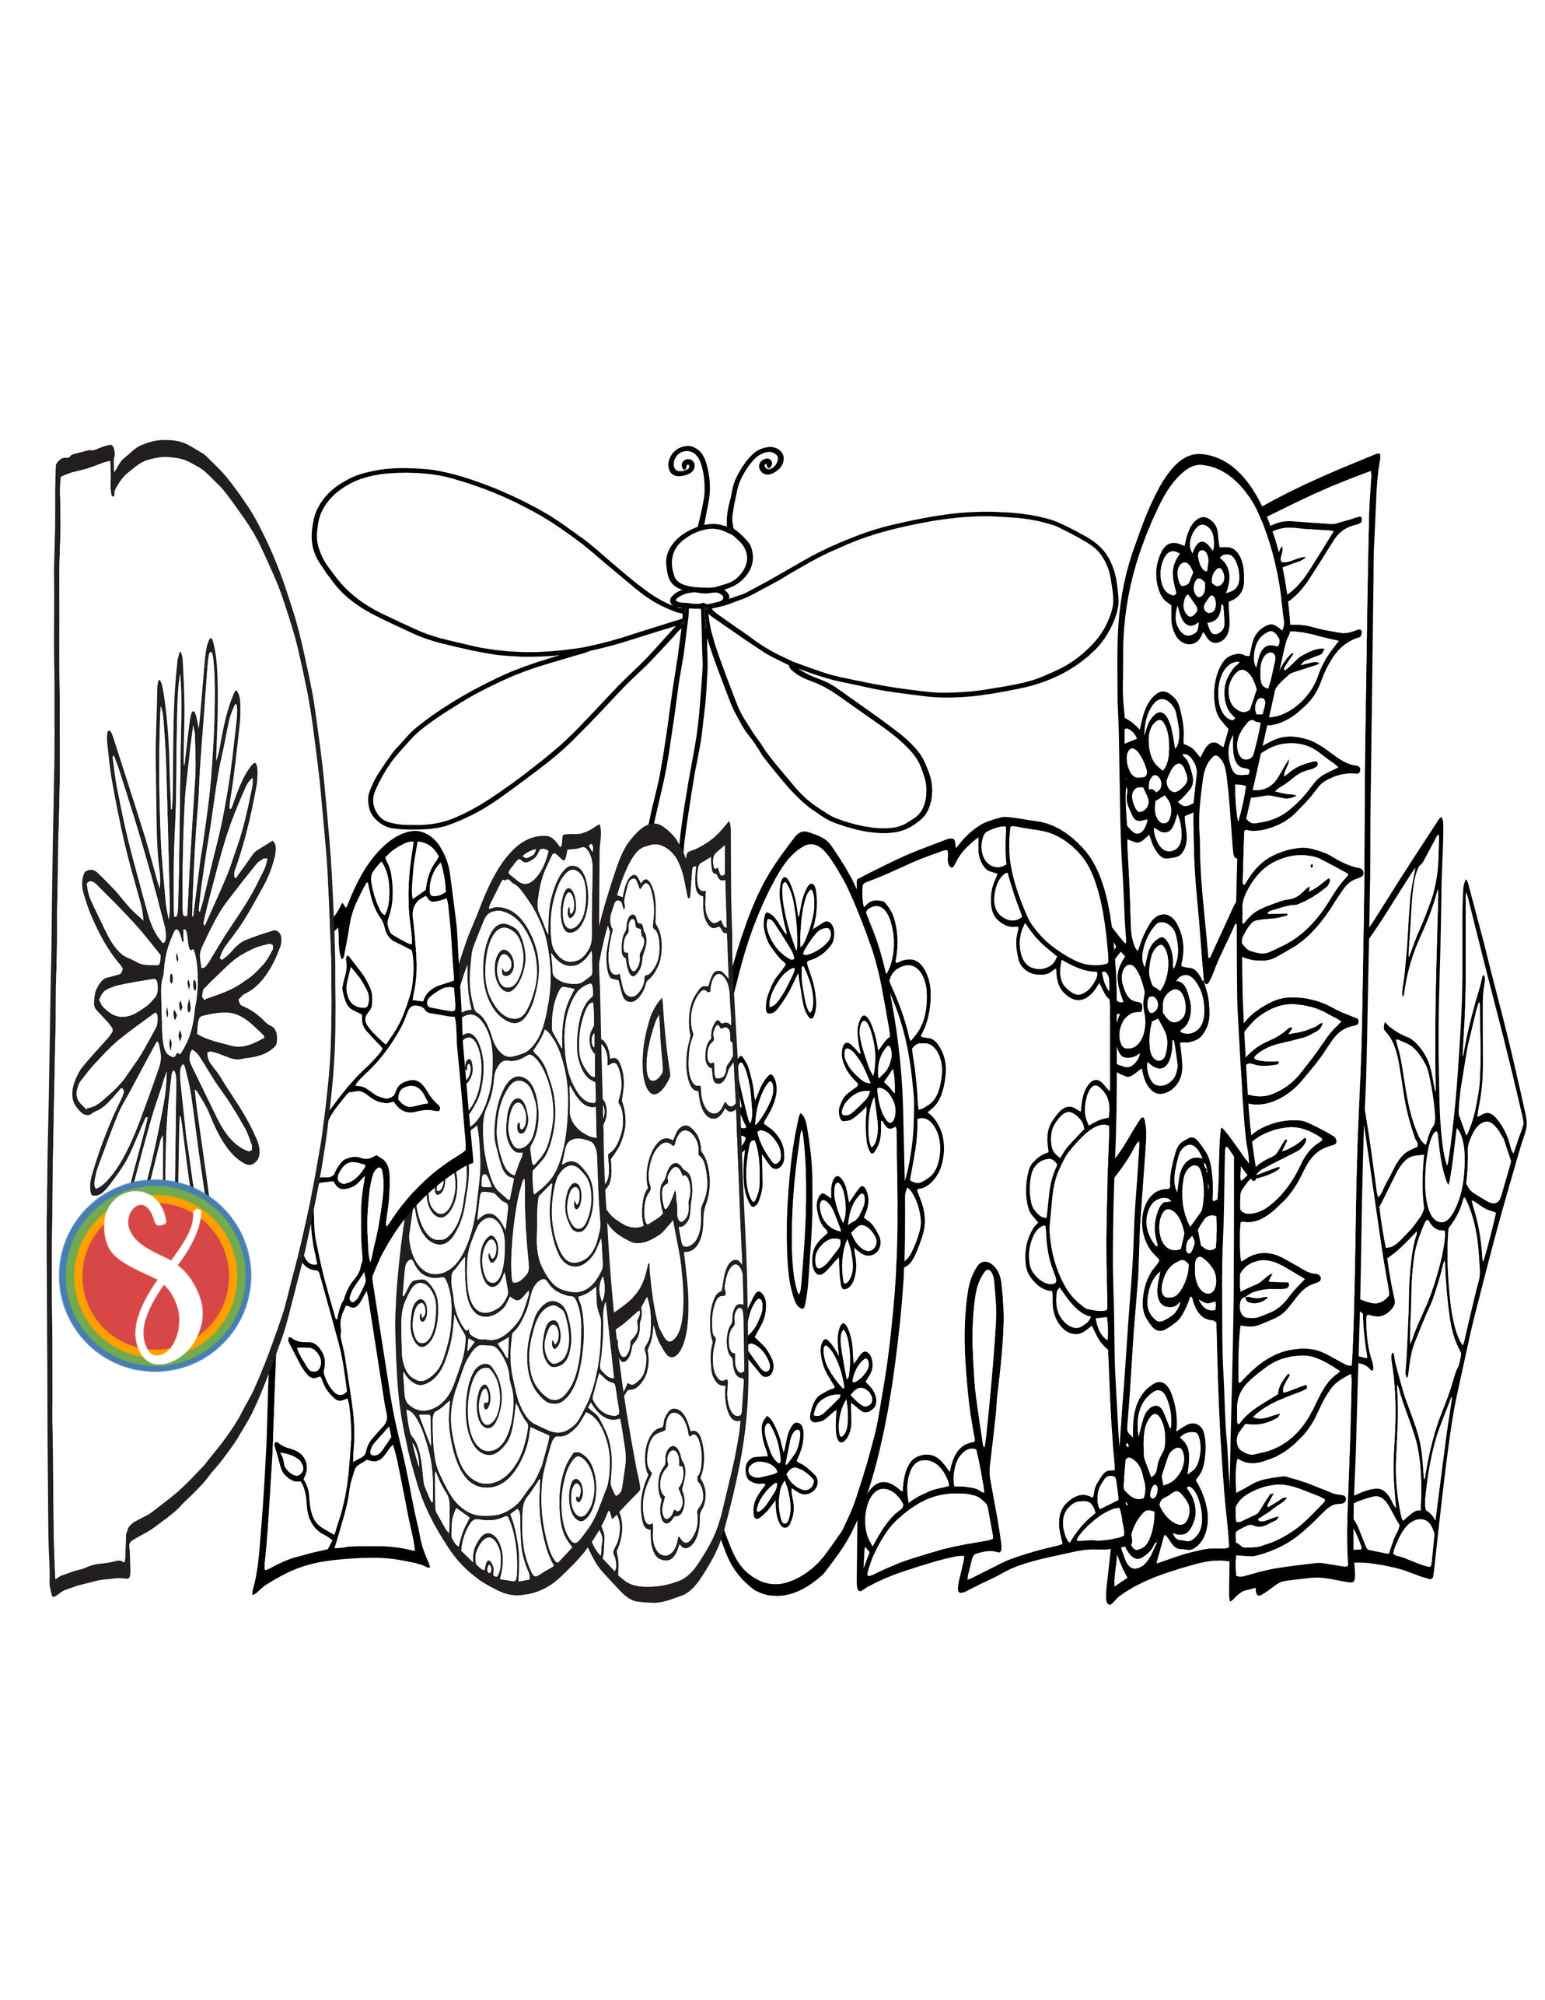 dragonfly coloring page "dragonfly" in bubble letters with flowers inside each letter to color